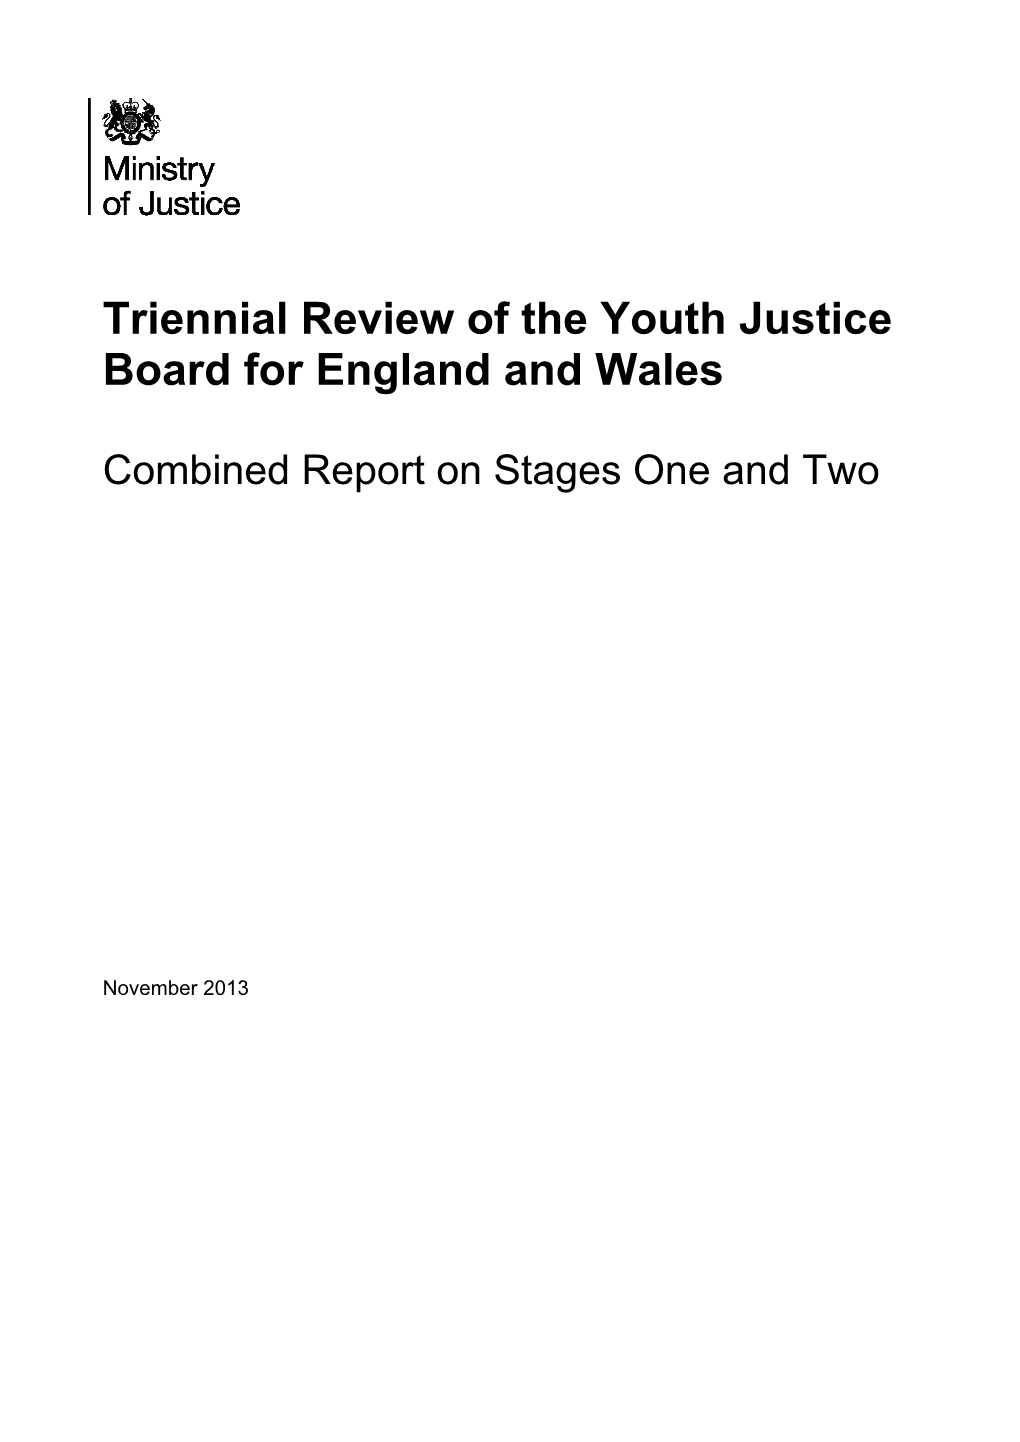 Triennial Review of the Youth Justice Board for England and Wales